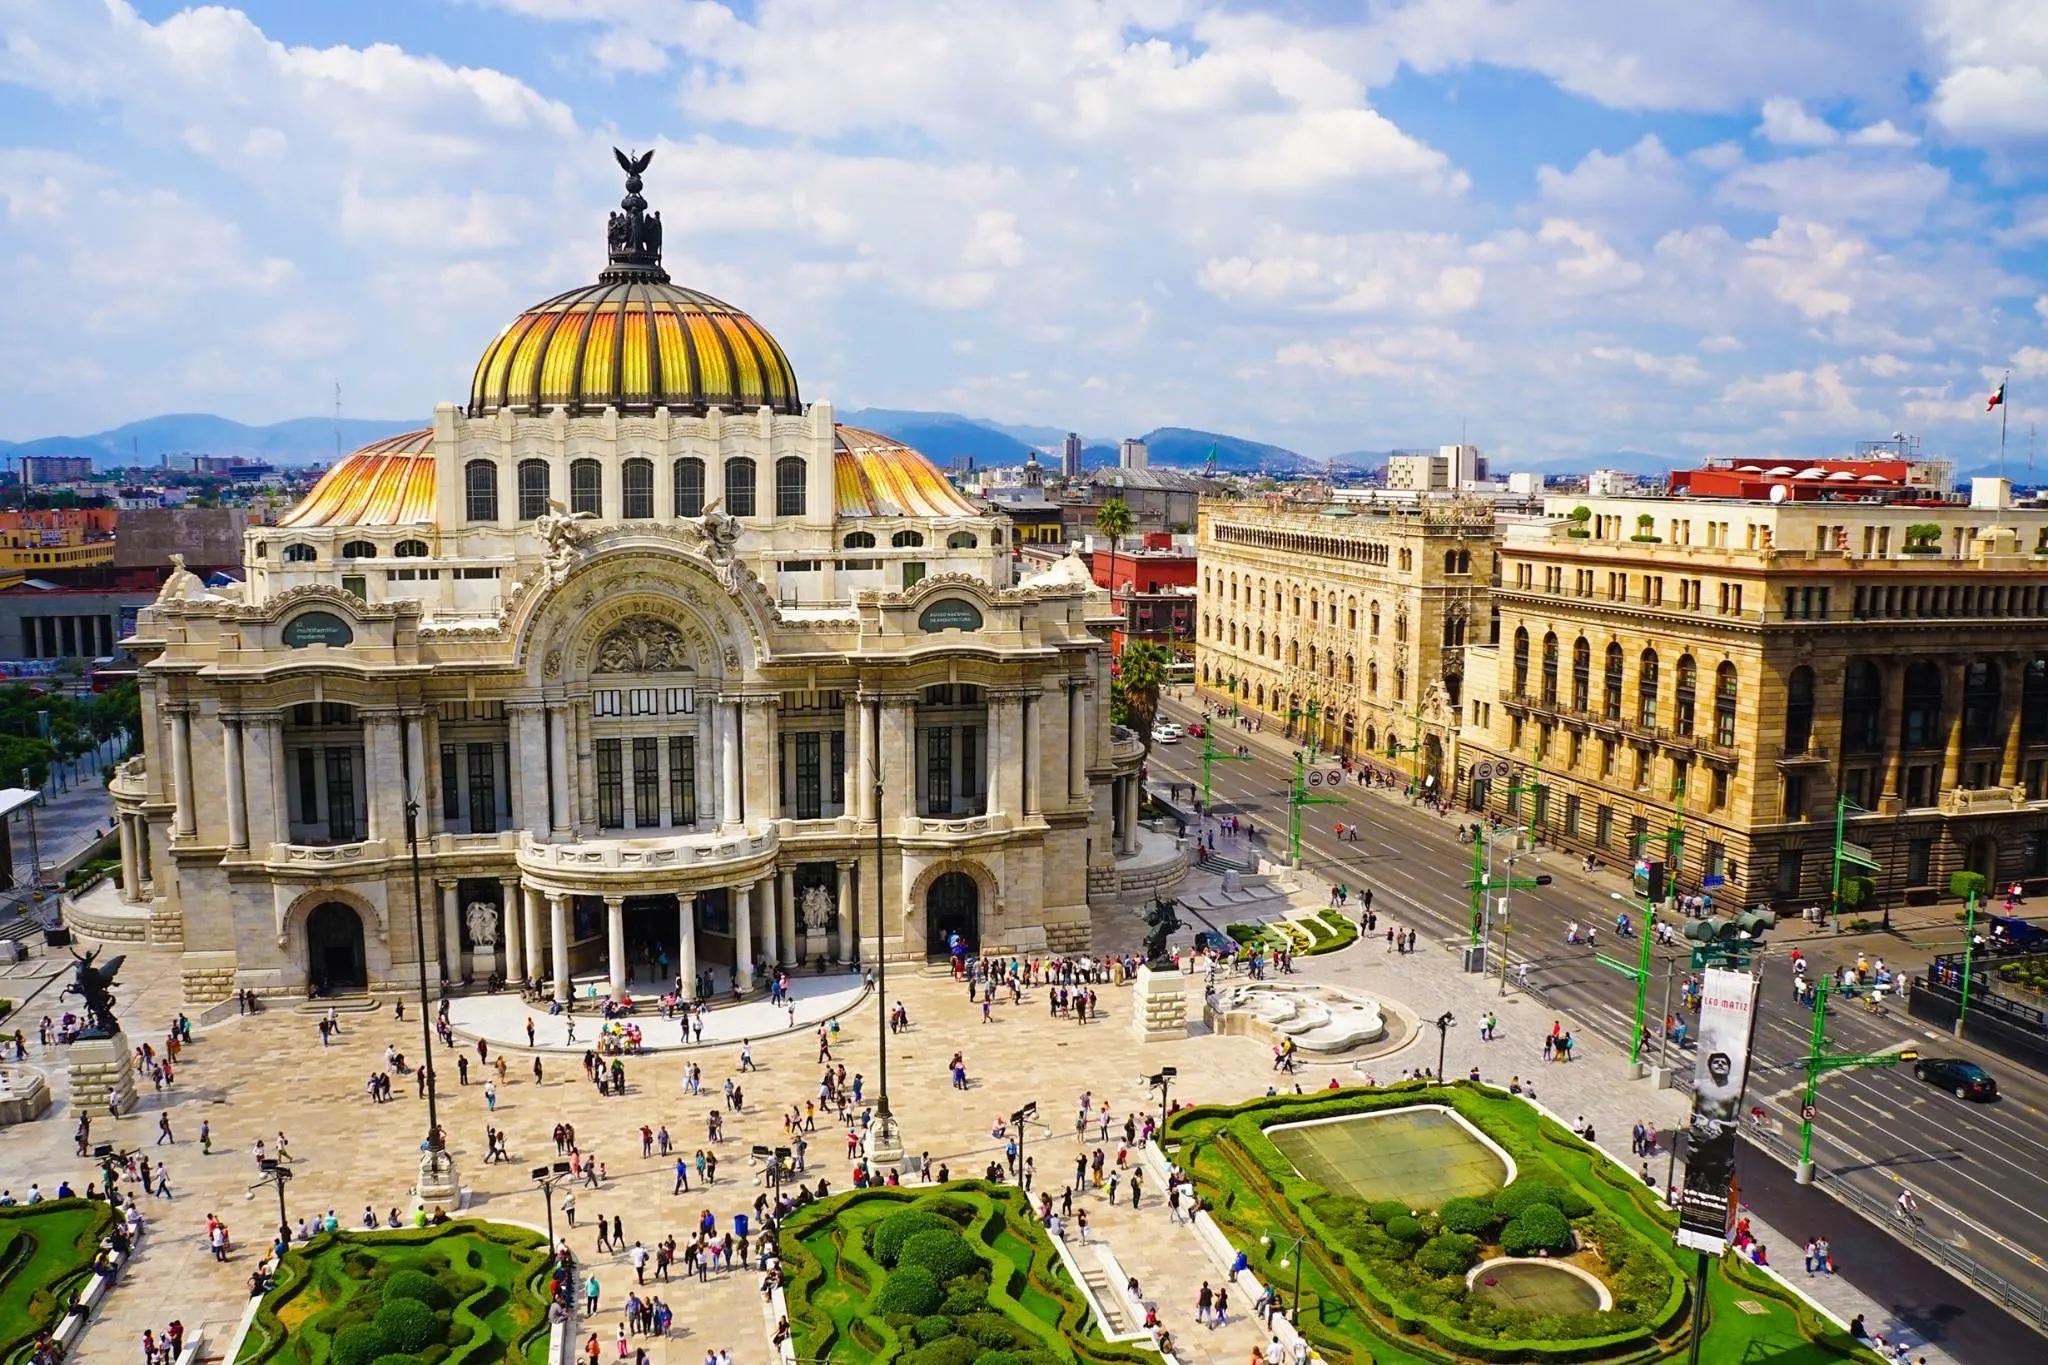 Things To Do In Mexico City